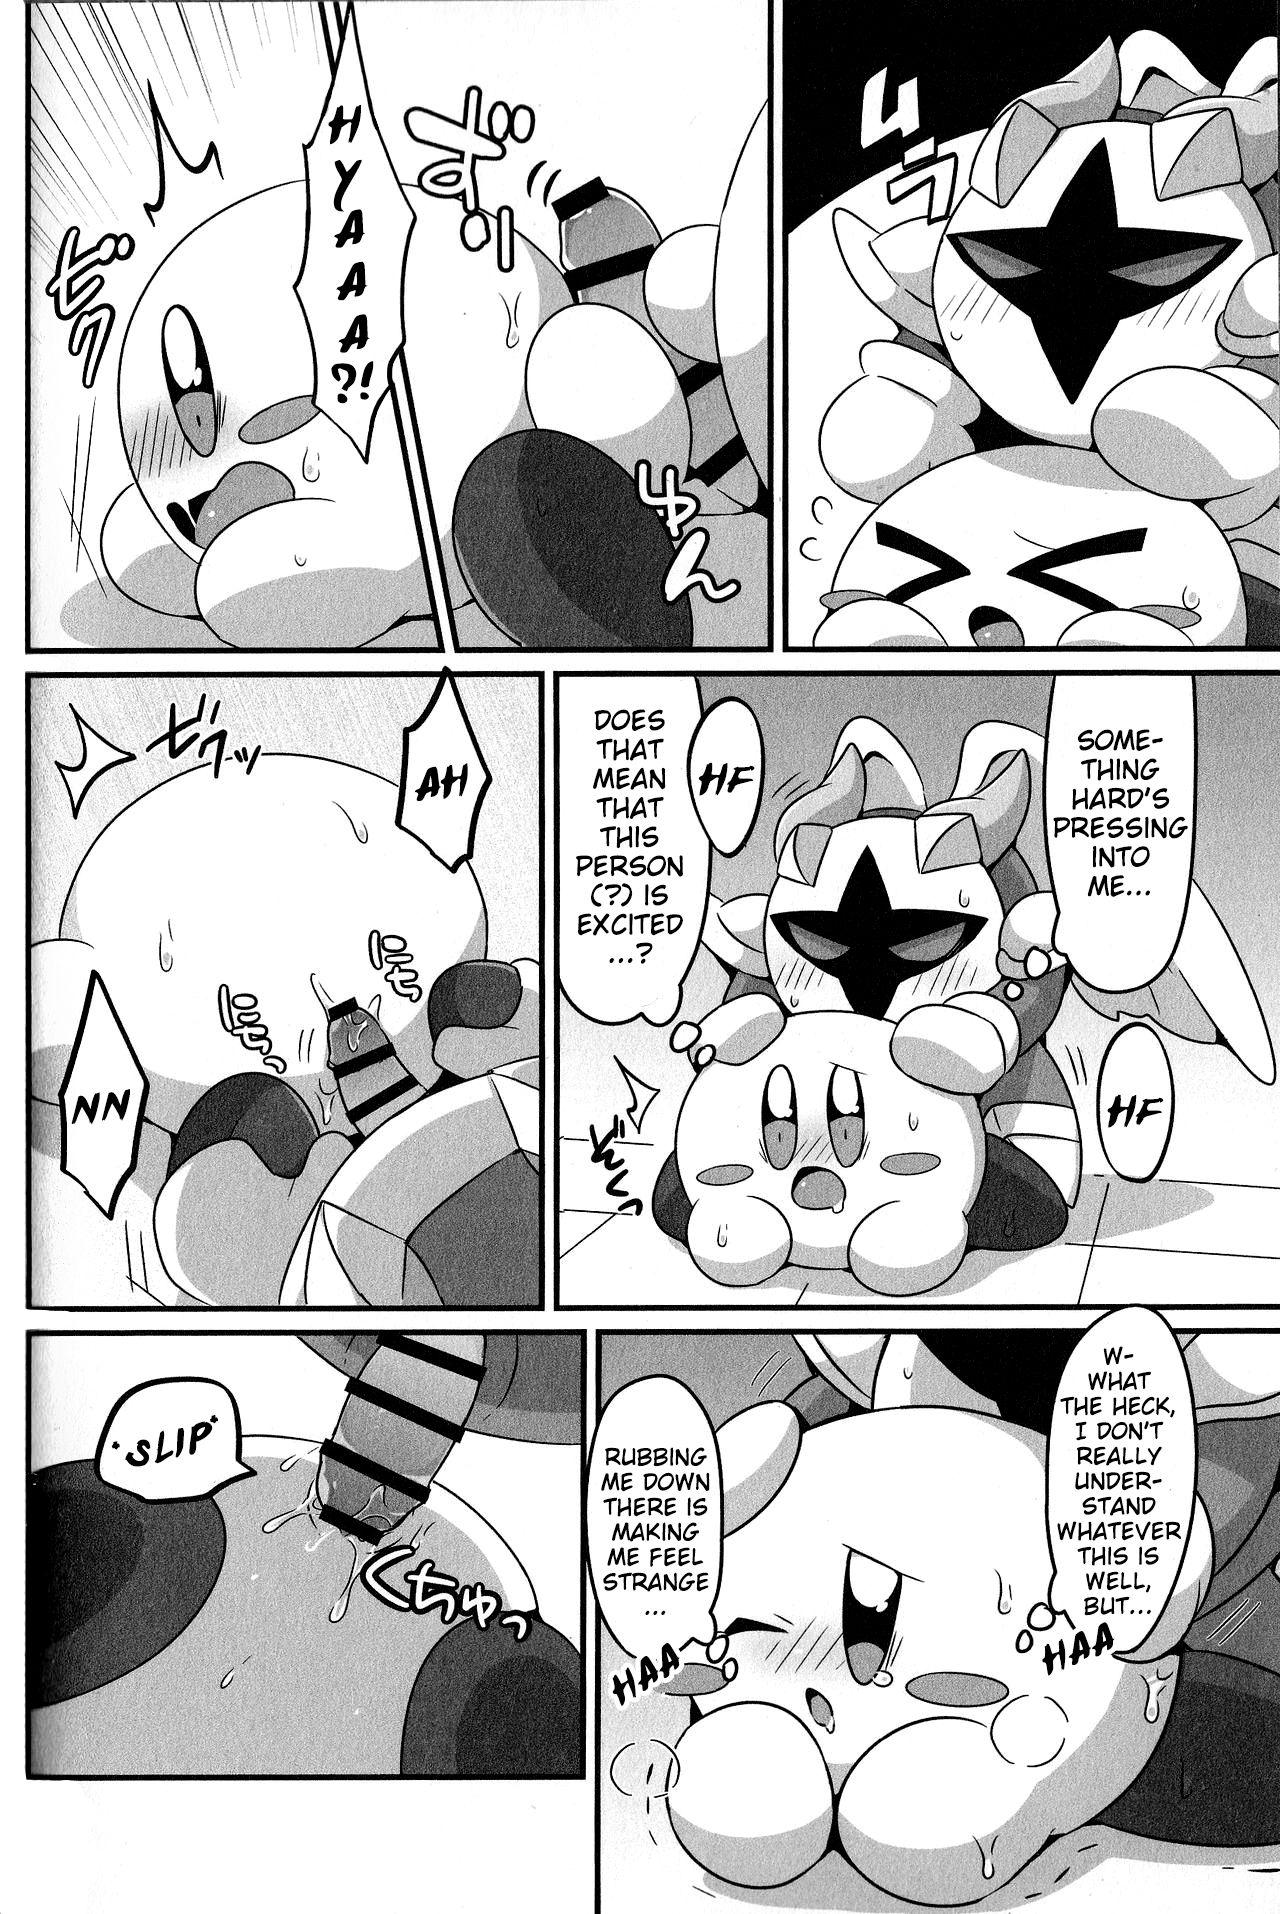 Real Couple I Want to Do XXX Even For Spheres! - Kirby Hot Chicks Fucking - Page 5